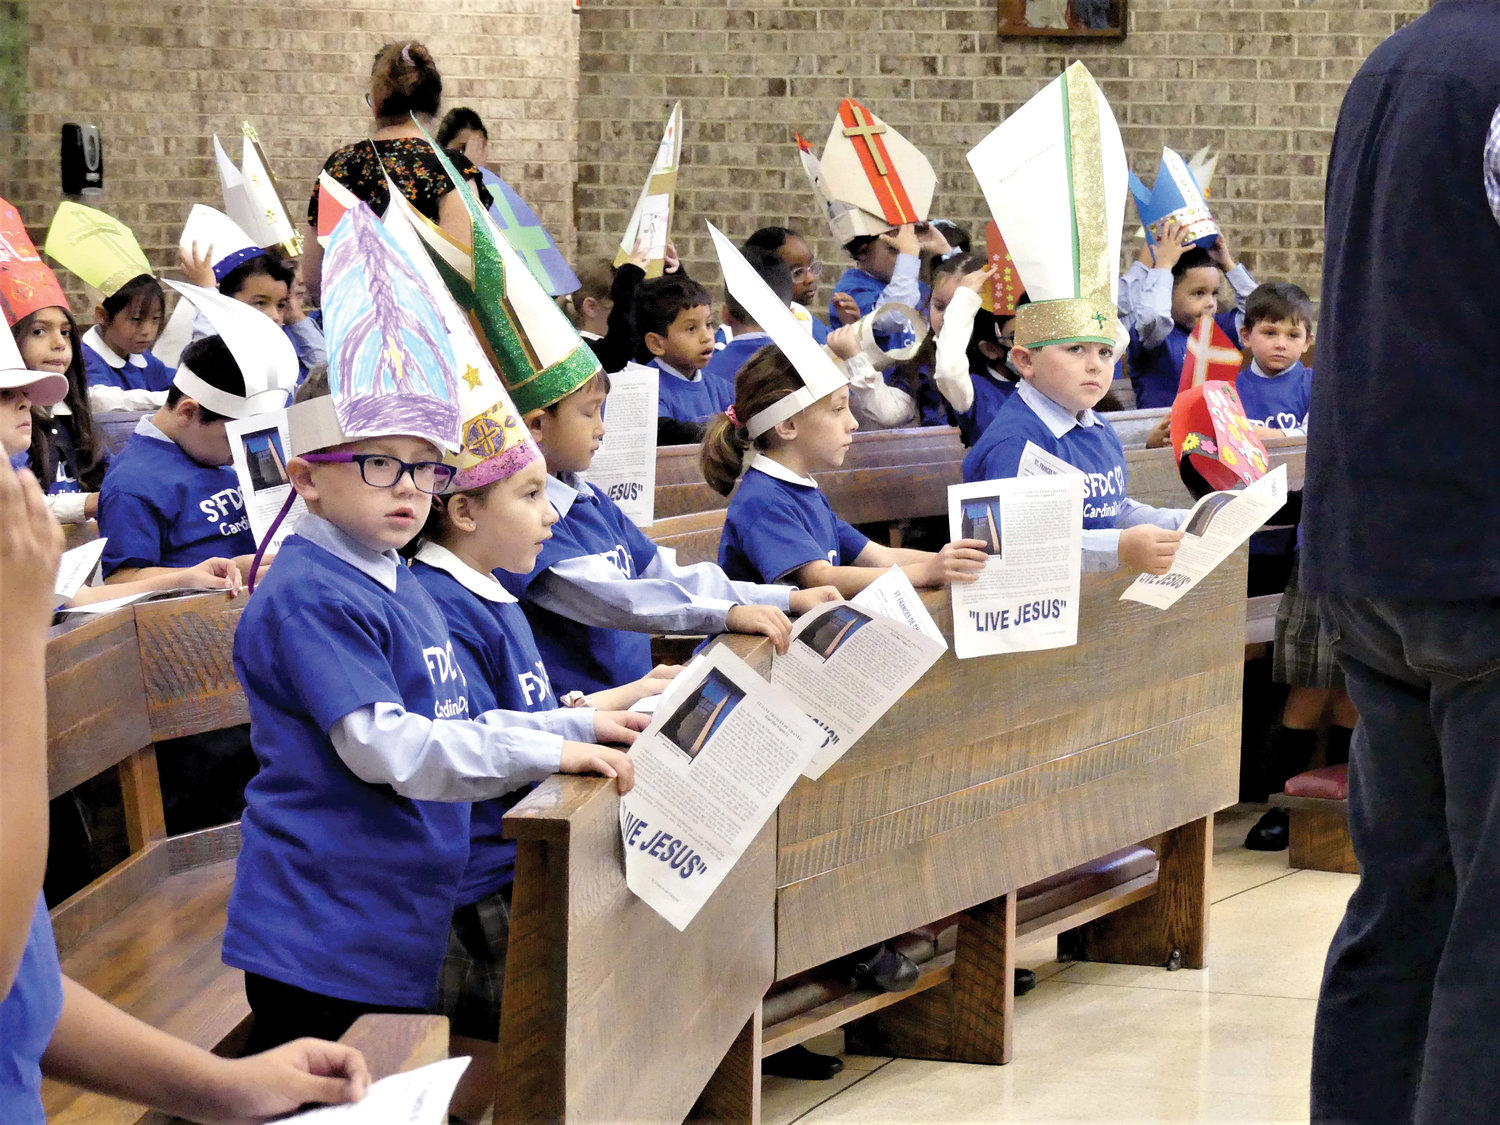 Students of St. Frances de Chantal School in the Bronx wear ecclesiastical headgear they fashioned themselves at a Mass Cardinal Dolan celebrated Oct. 13 at St. Frances de Chantal Church.